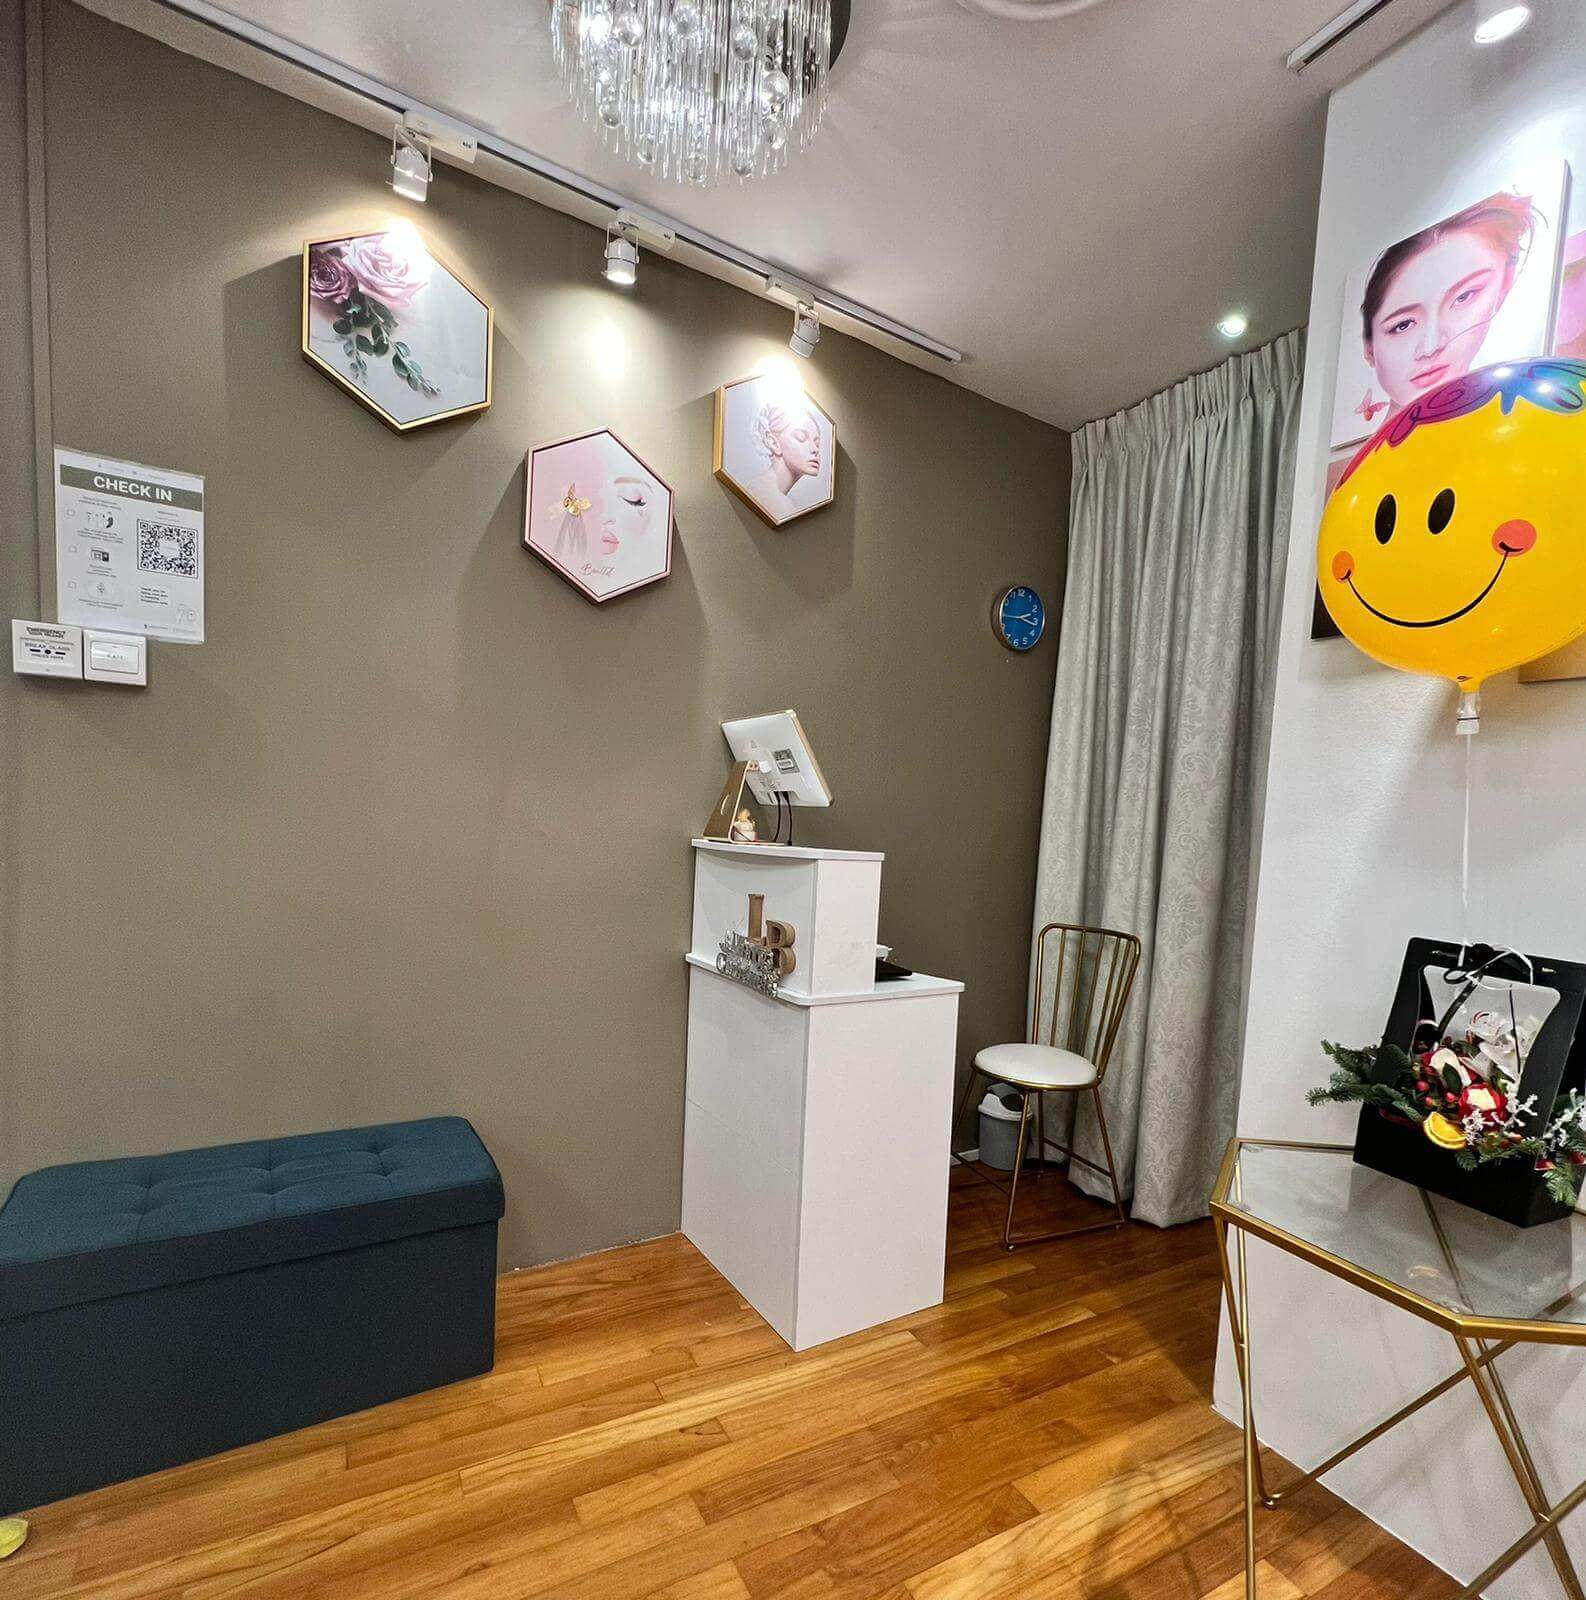 (Expired)Beauty Salon Shop Premise In CBD For Takeover